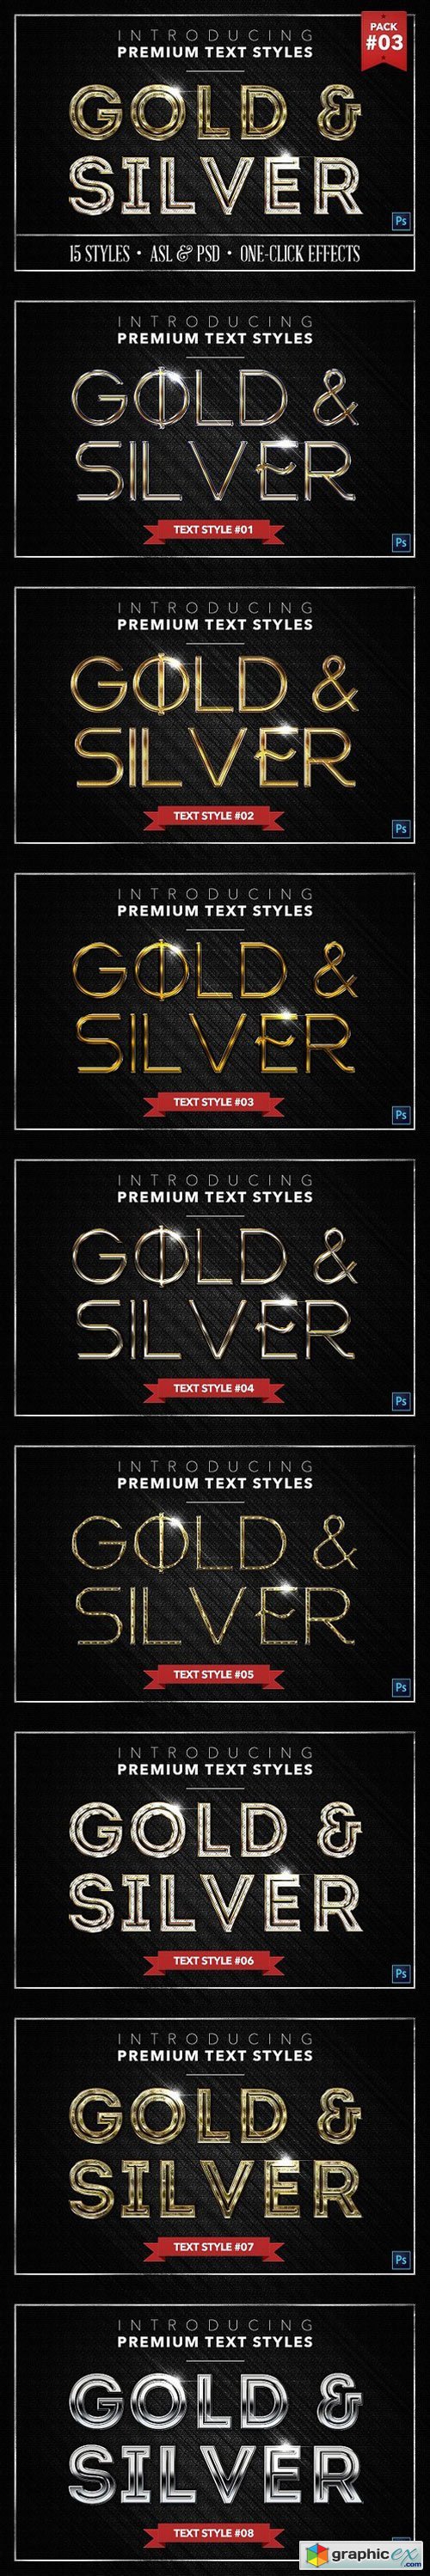 Gold & Silver #3 - 15 Styles